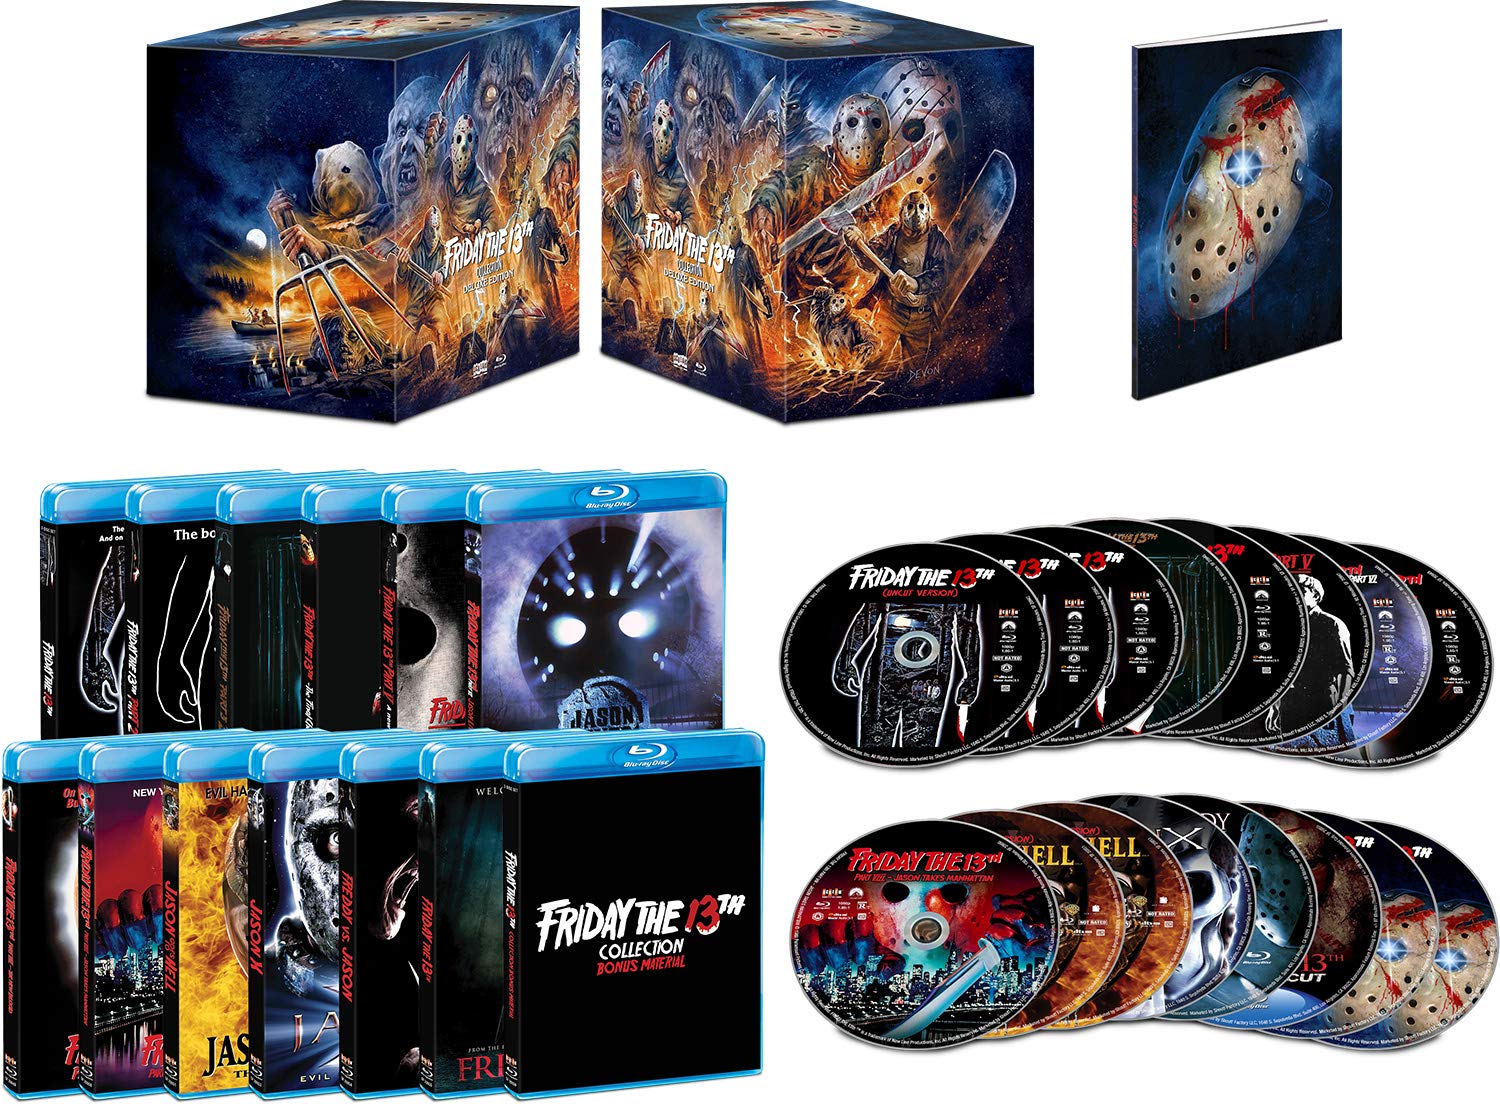 Friday the 13th 13-Film Collection: Deluxe Edition (Blu-ray) $75 + Free Shipping